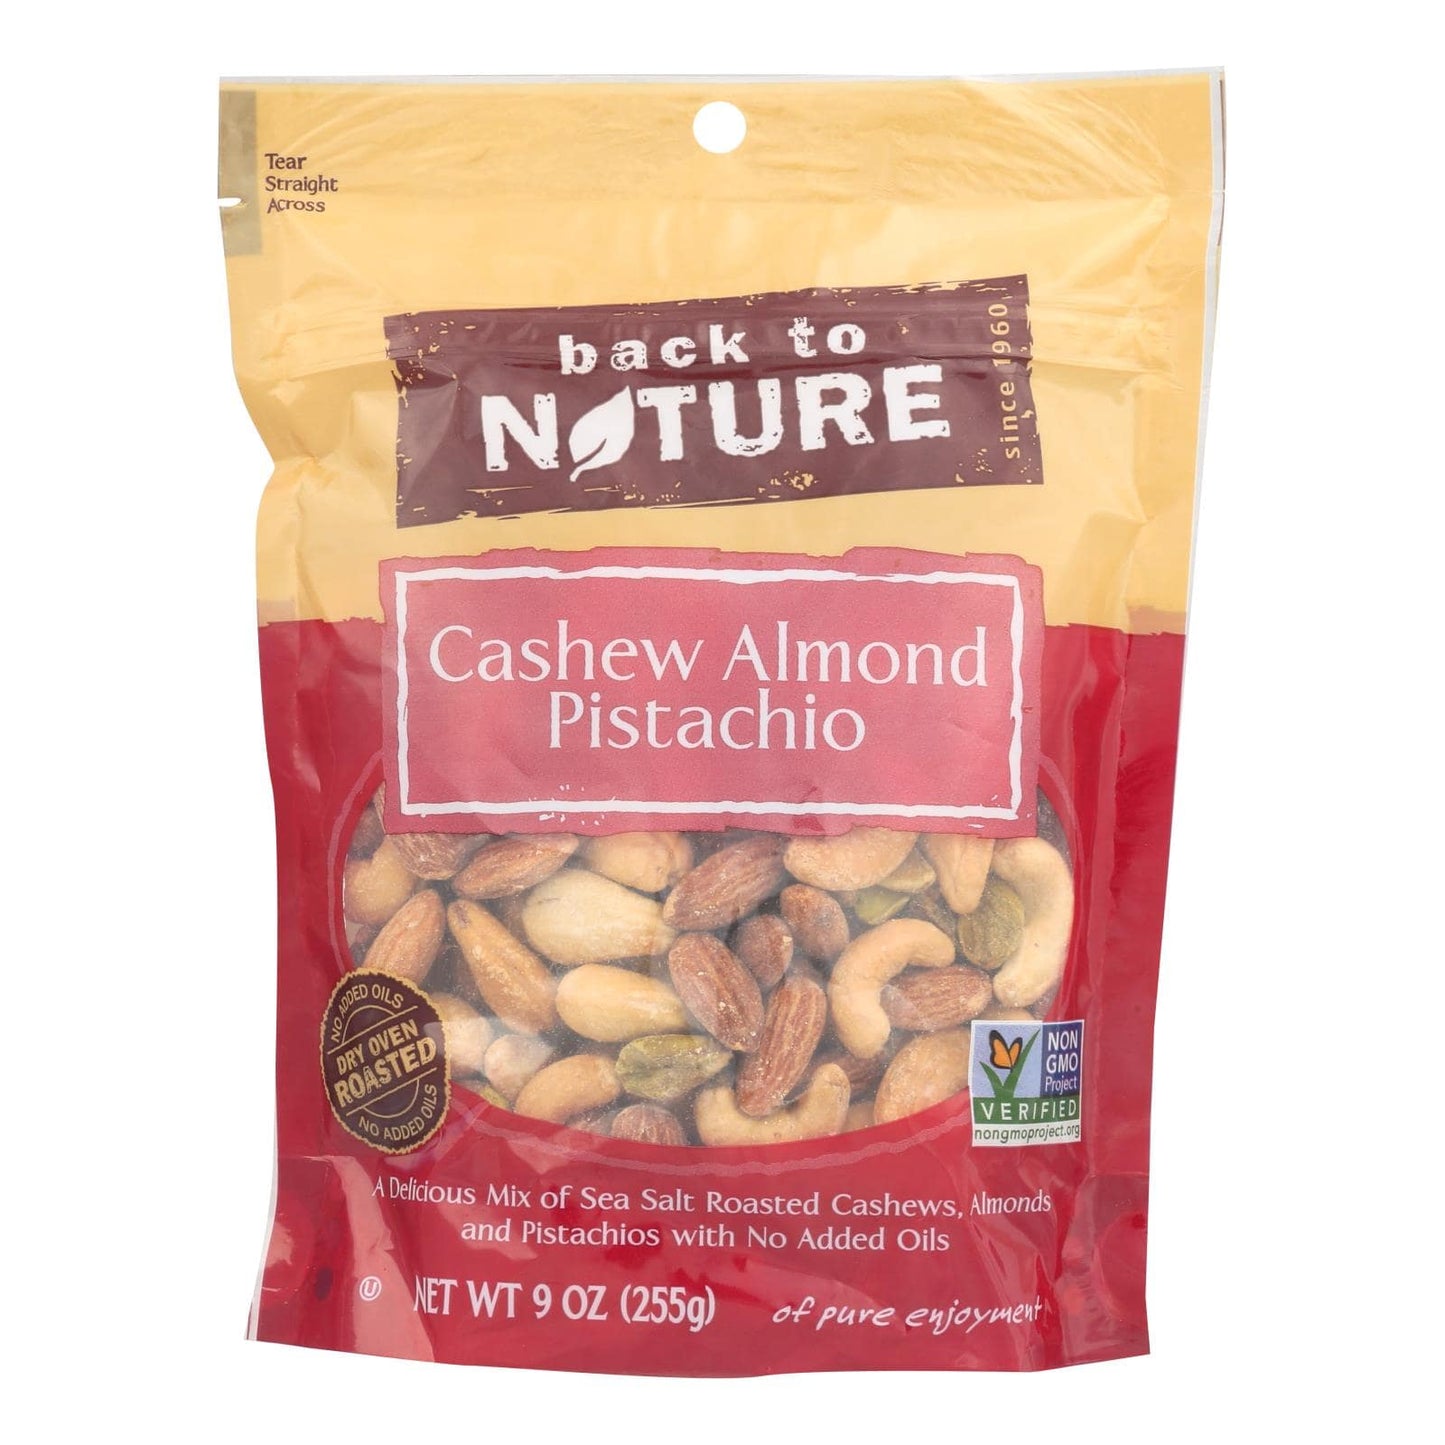 Back To Nature Cashew Almond Pistachio Mix - Case Of 9 - 9 Oz. | OnlyNaturals.us